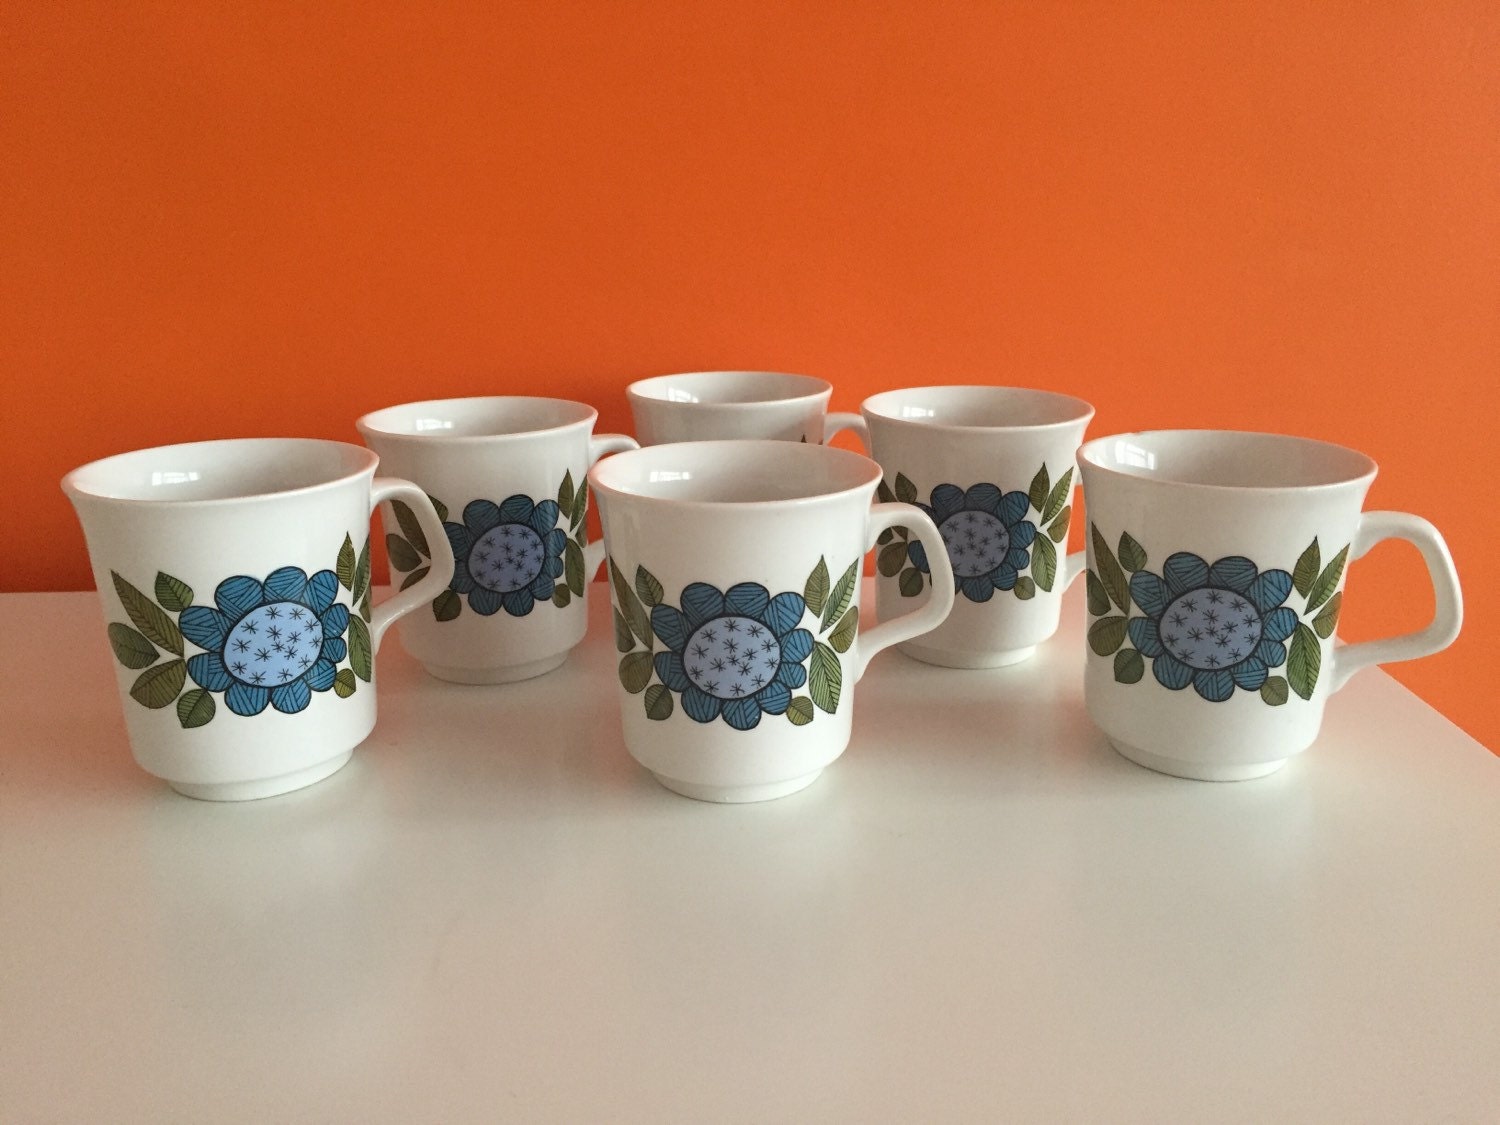  1960s  J G Meakin Topic Coffee  Cups  x6 by stylesixties on 